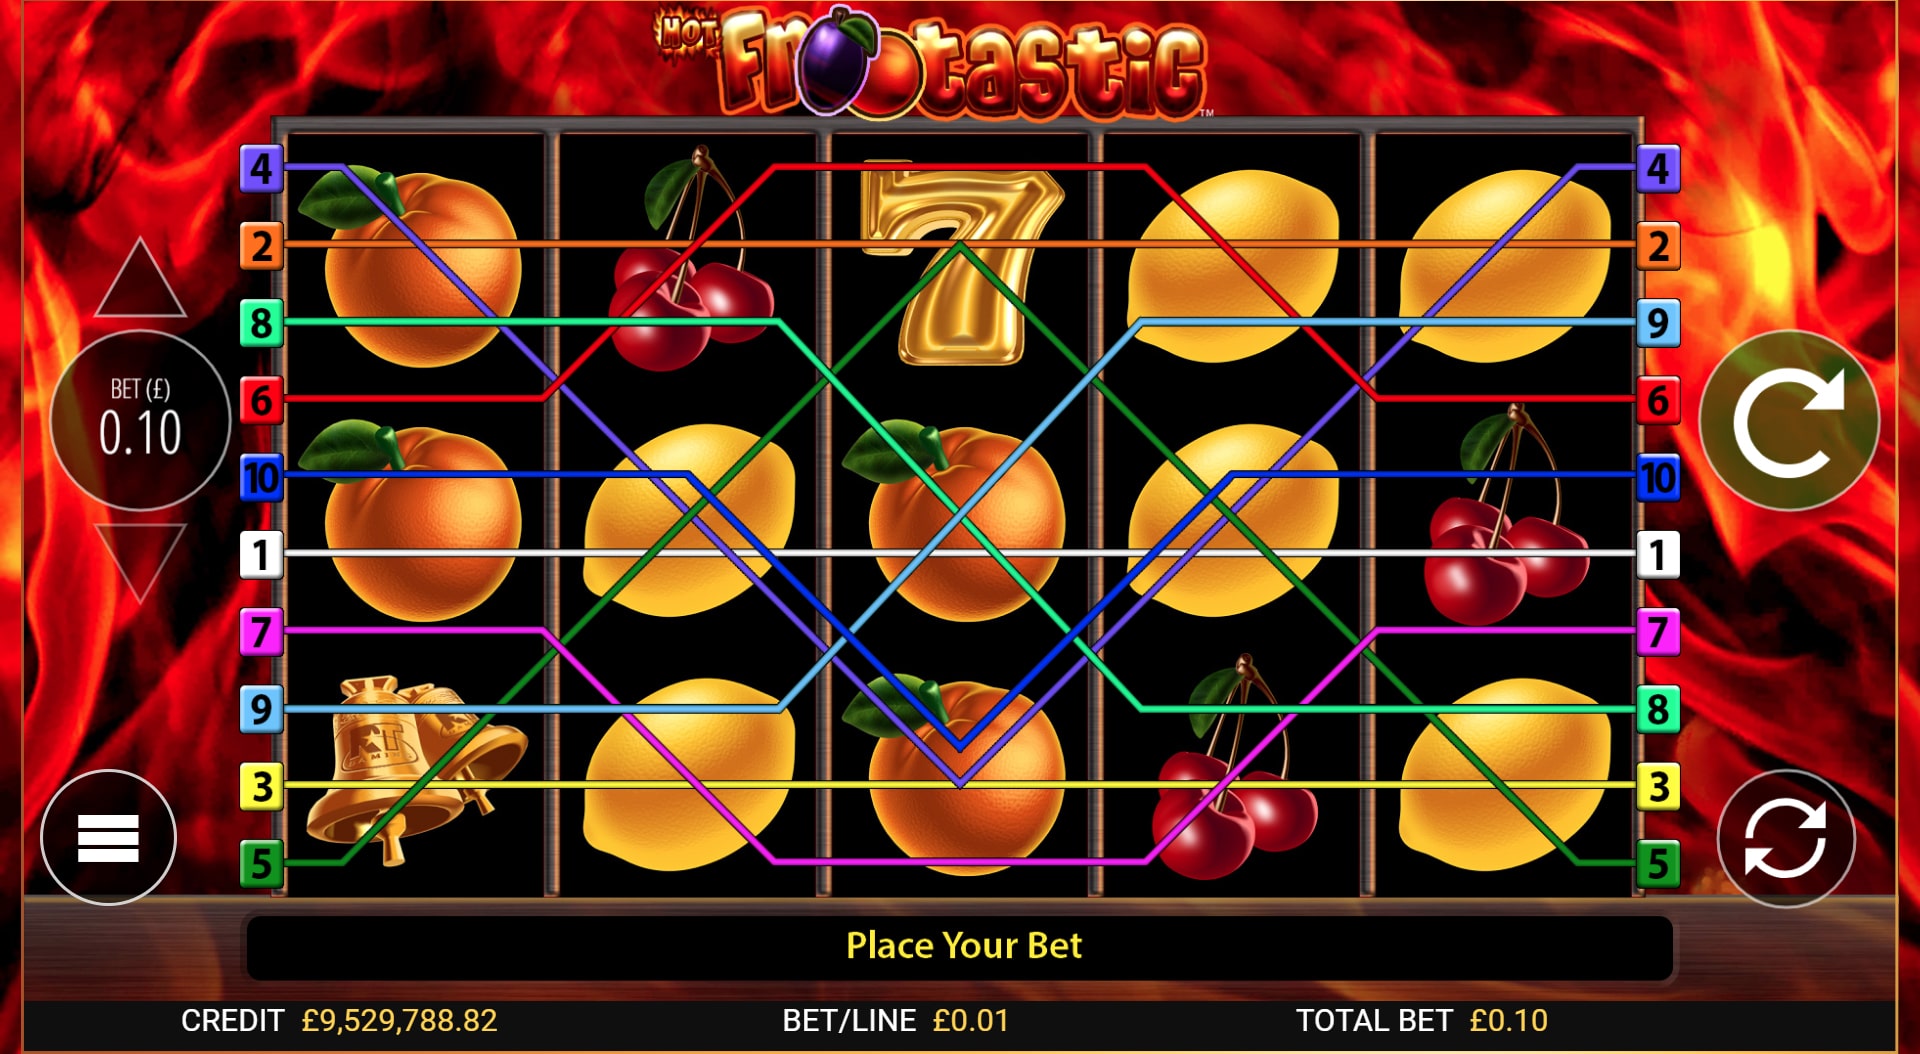 Hot Frootastic Free Spins